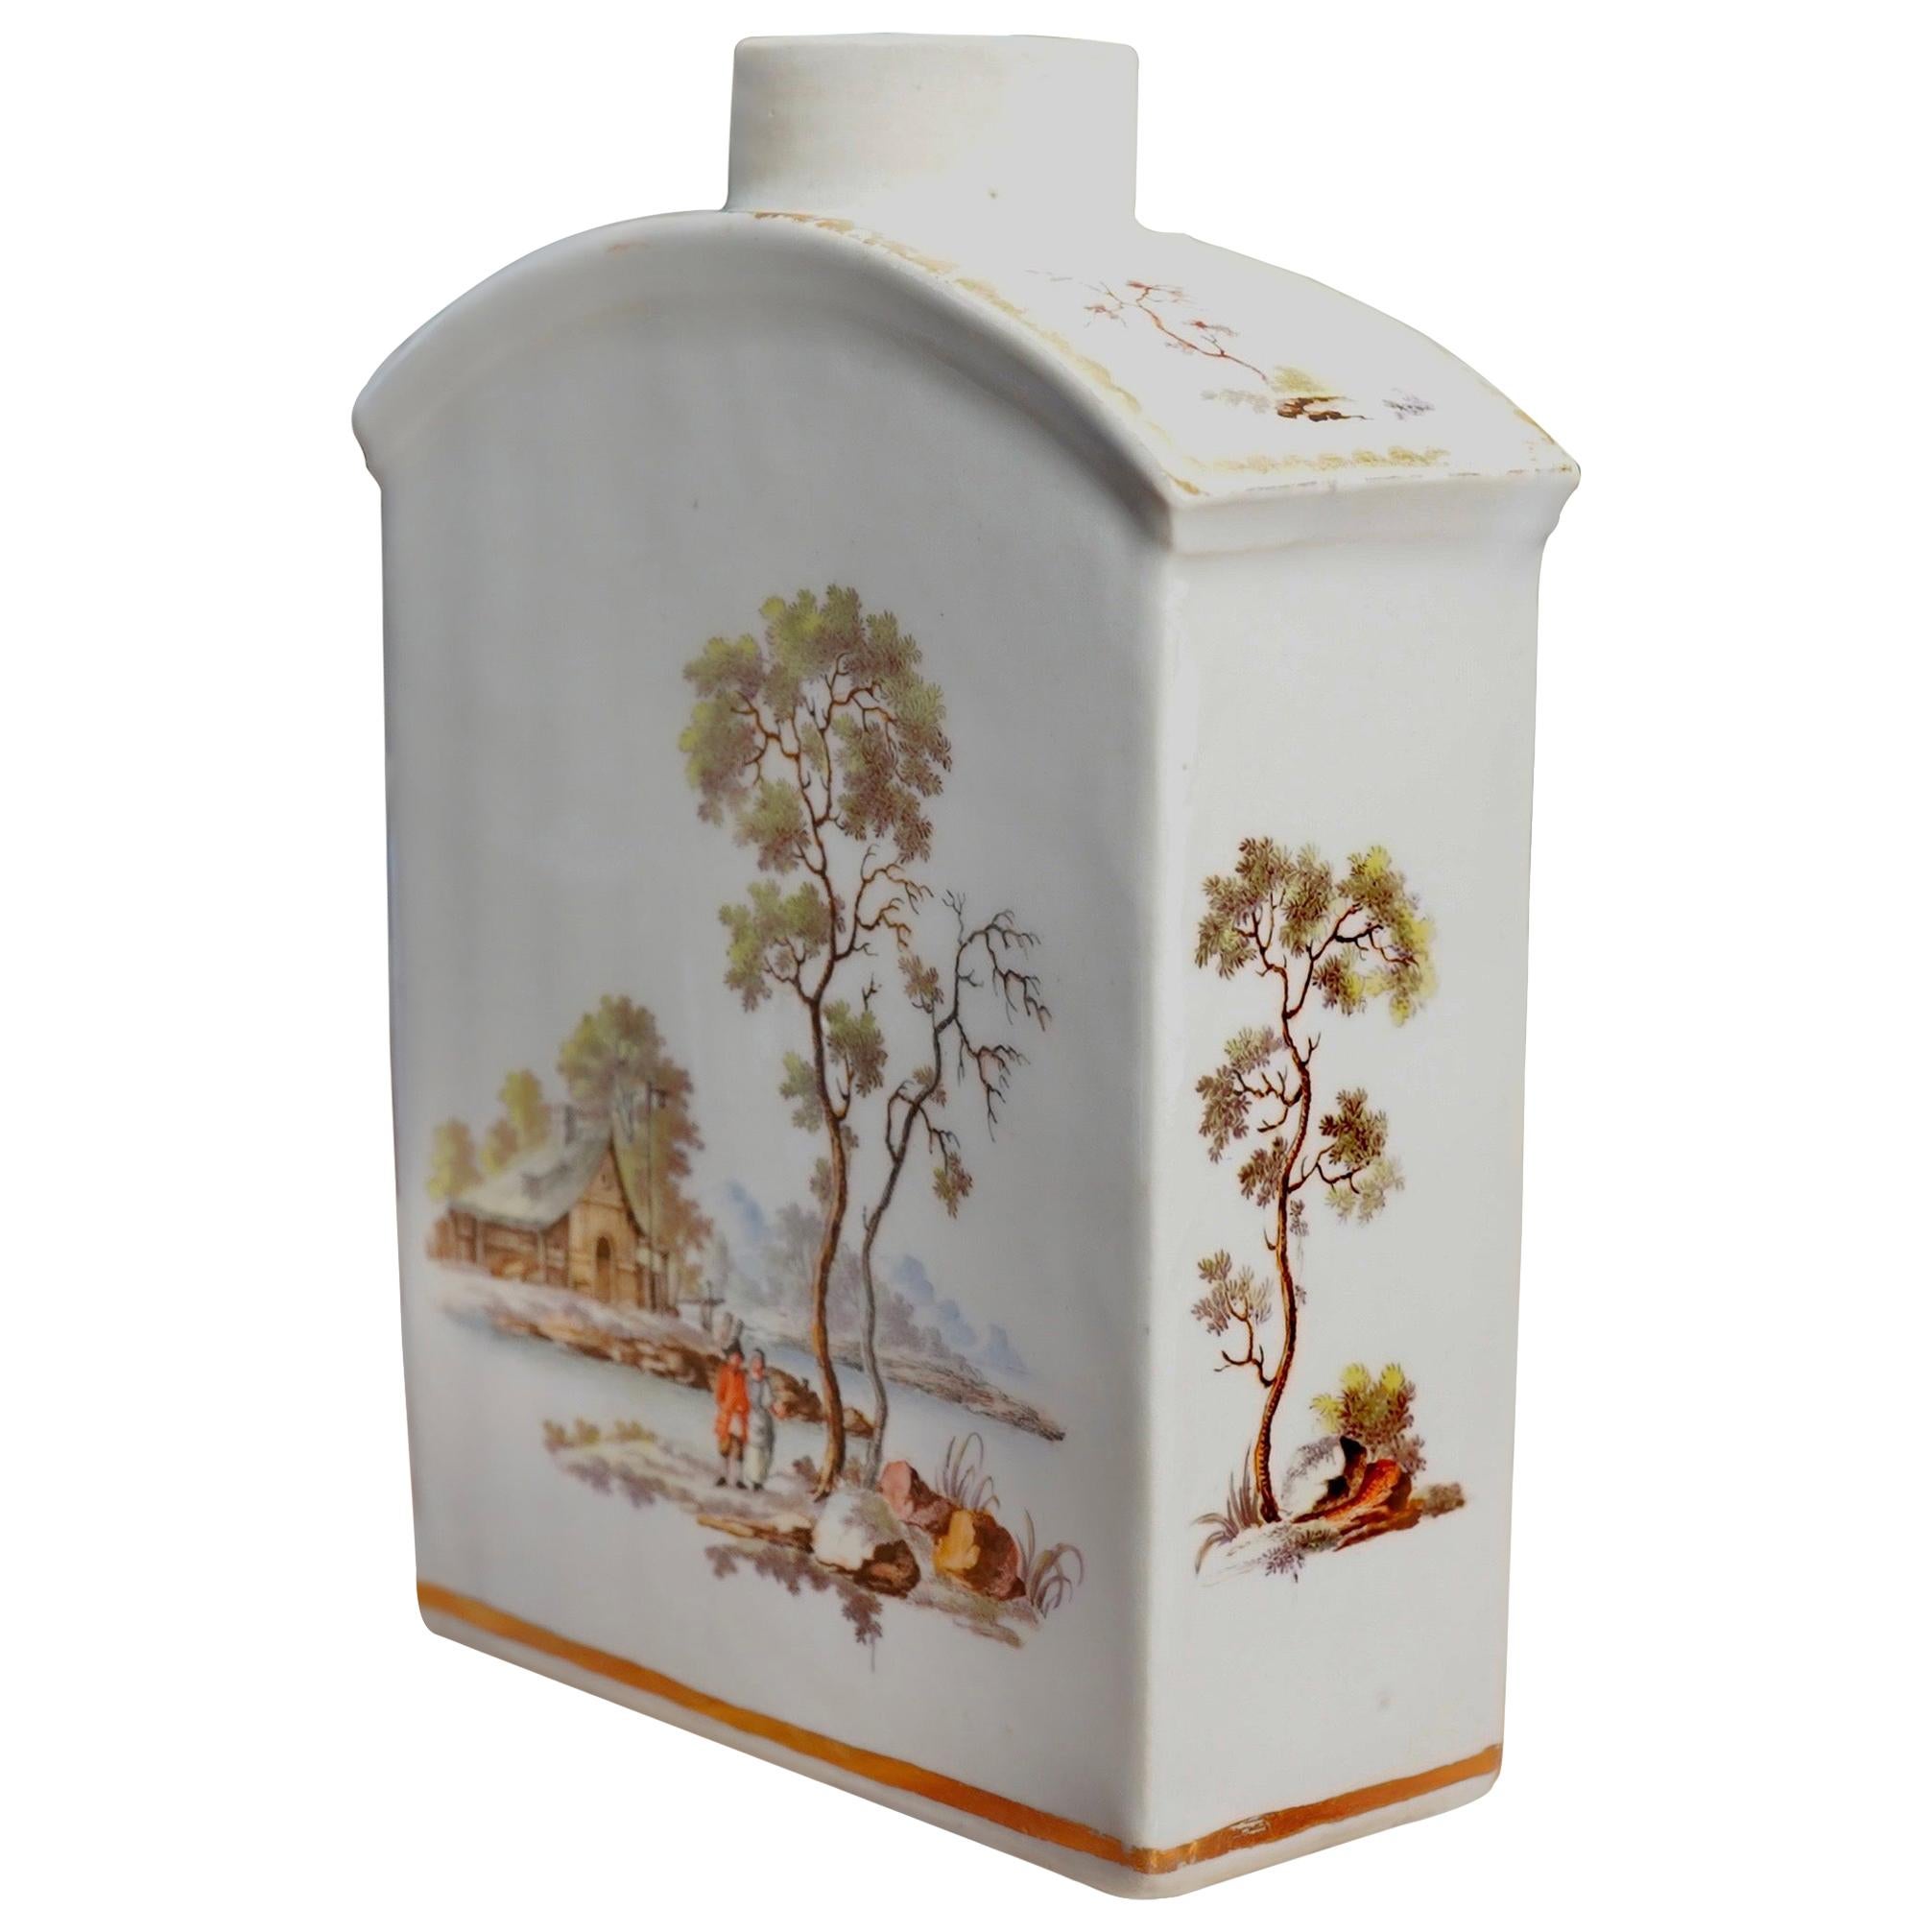 Zurich Swiss Porcelain Tea Canister, Finely Painted Landscapes, circa 1775 For Sale